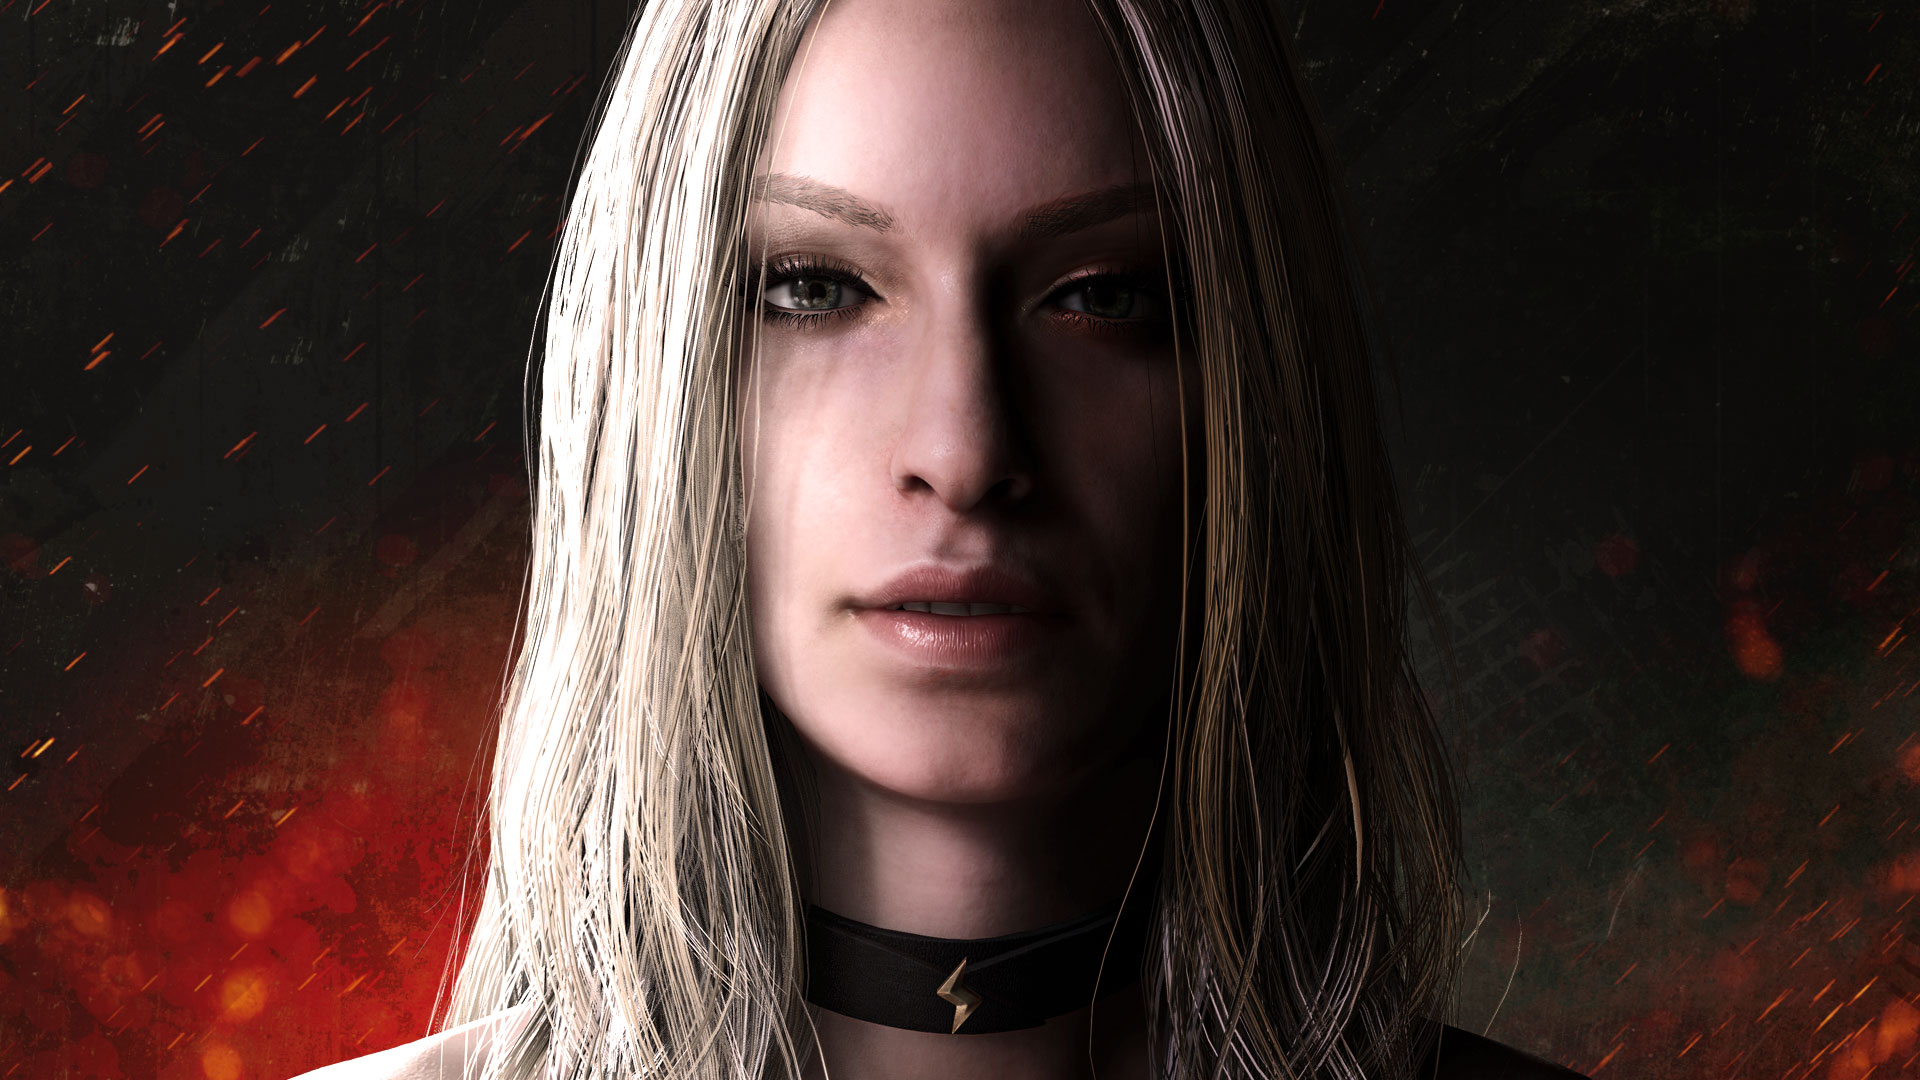 Handy-Wallpaper Devil May Cry, Computerspiele, Trish (Devil May Cry), Devil May Cry 5 kostenlos herunterladen.